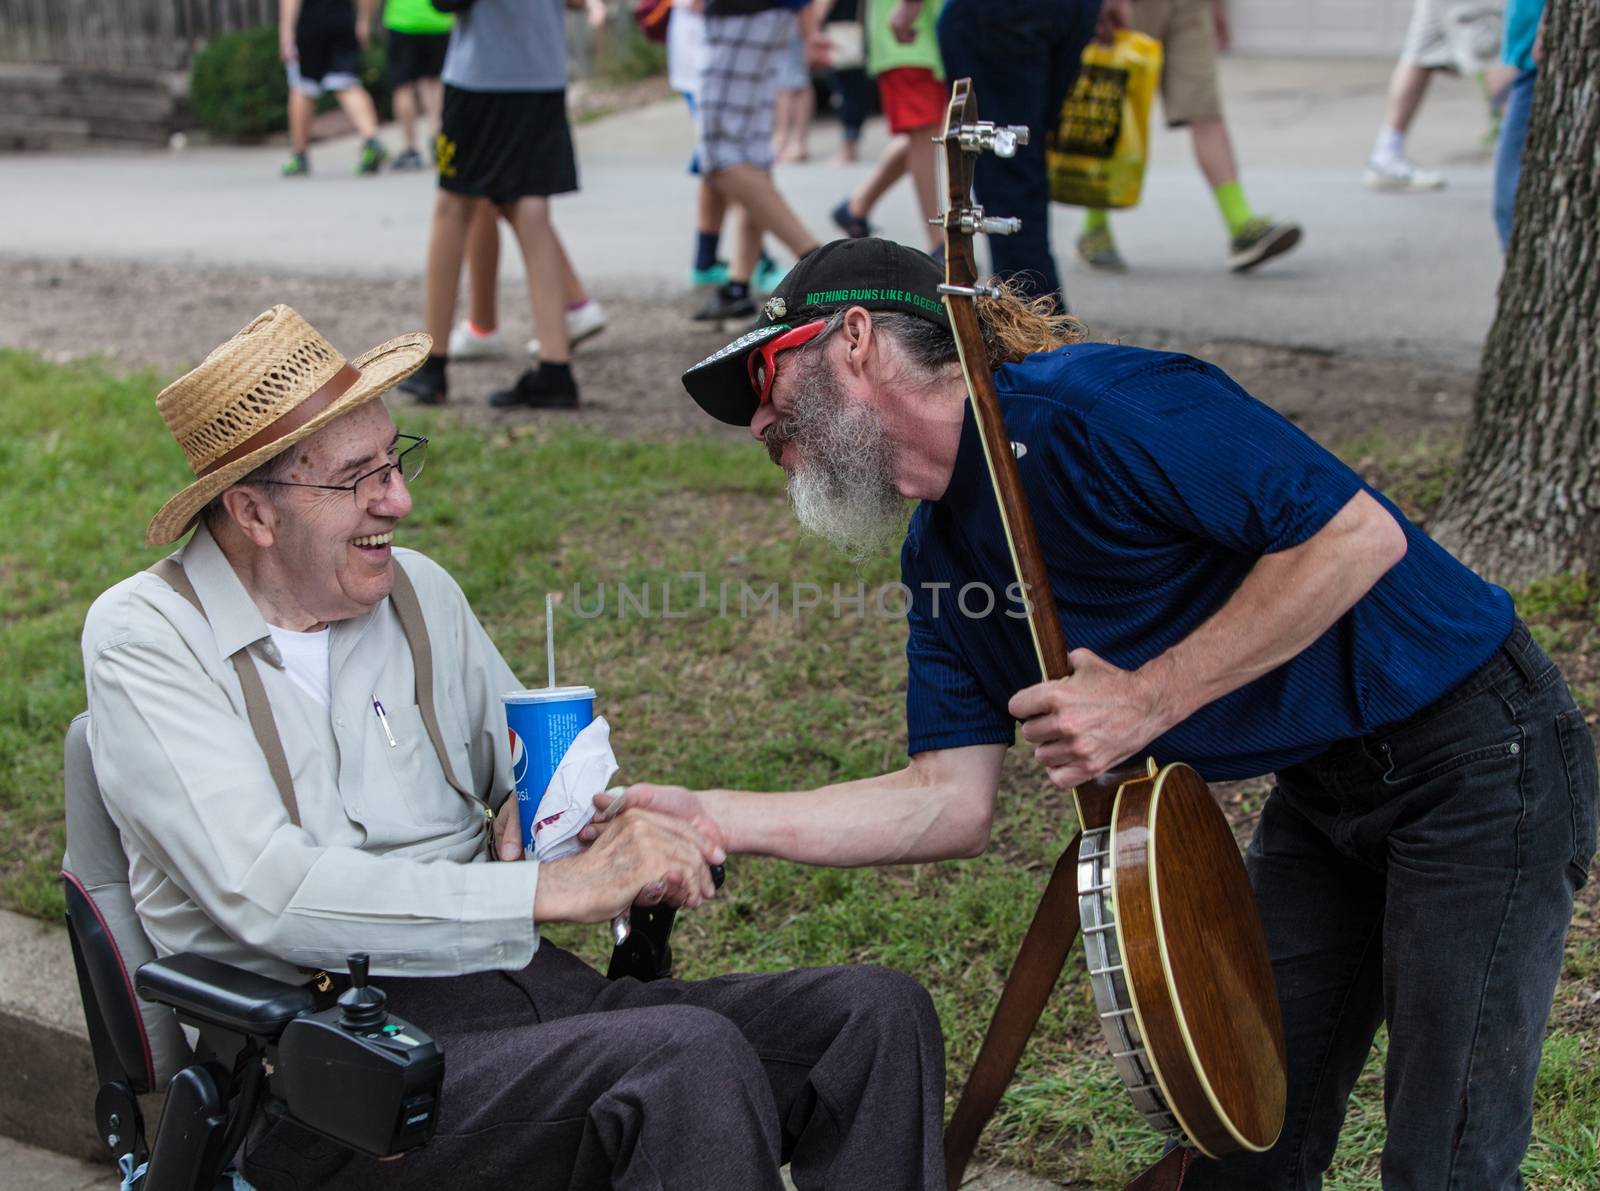 Banjo Player with Man in Wheelchair at Iowa State Fair by Creatista